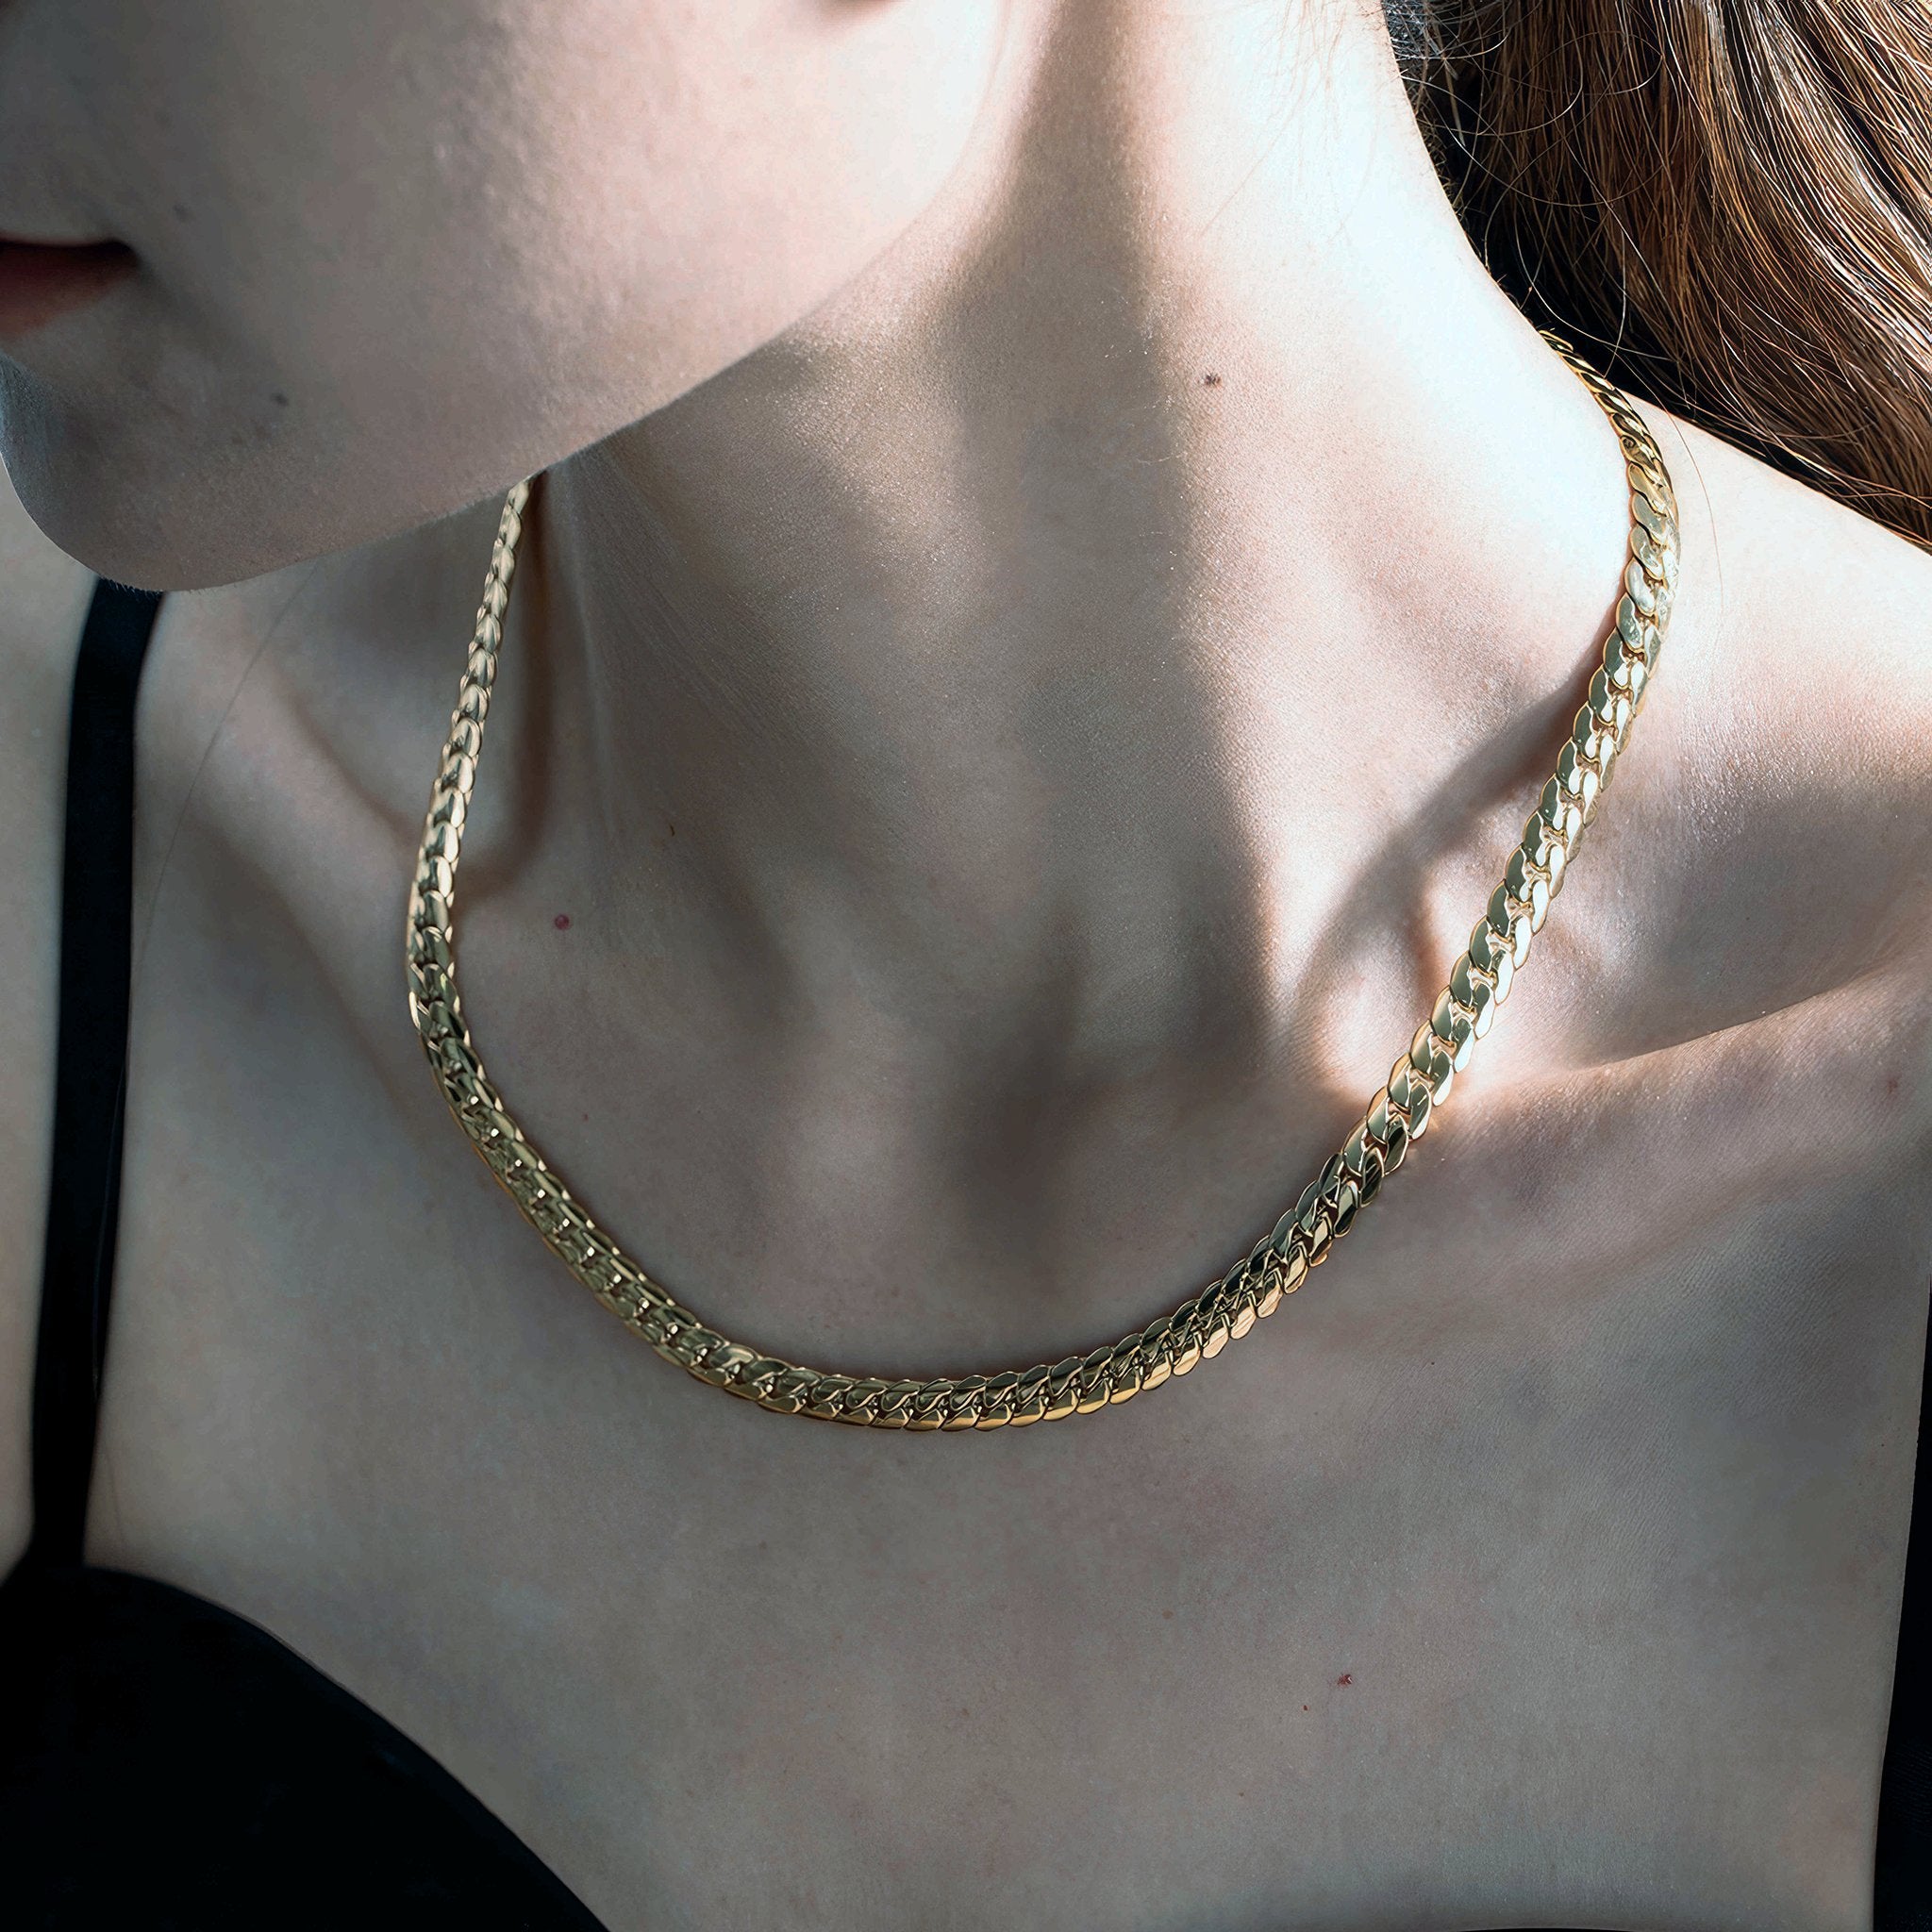 Minimalist Versatile Necklace - Nobbier - Necklace - 18K Gold And Titanium PVD Coated Jewelry